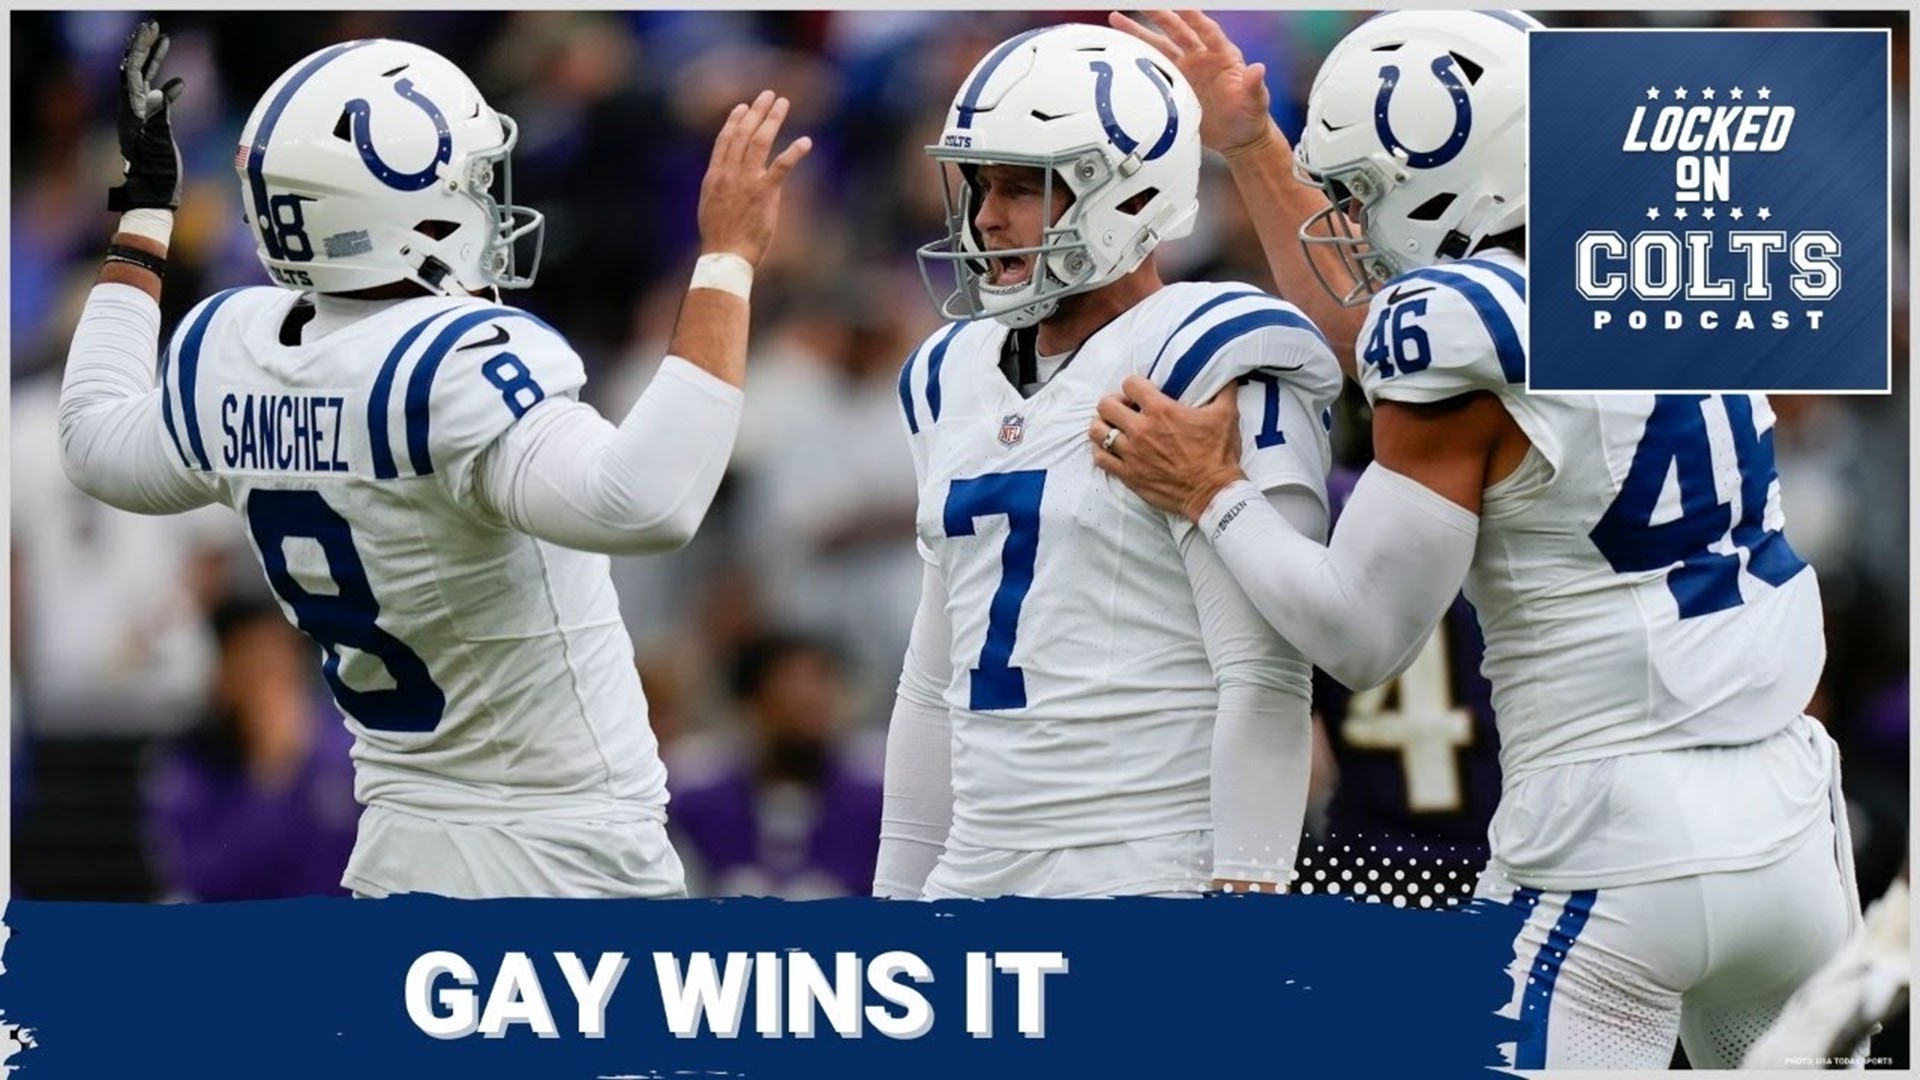 Indianapolis Colts kicker Matt Gay was the hero in Baltimore this weekend, knocking through 5 field goals including a record breaking 4 of over 50 yards.